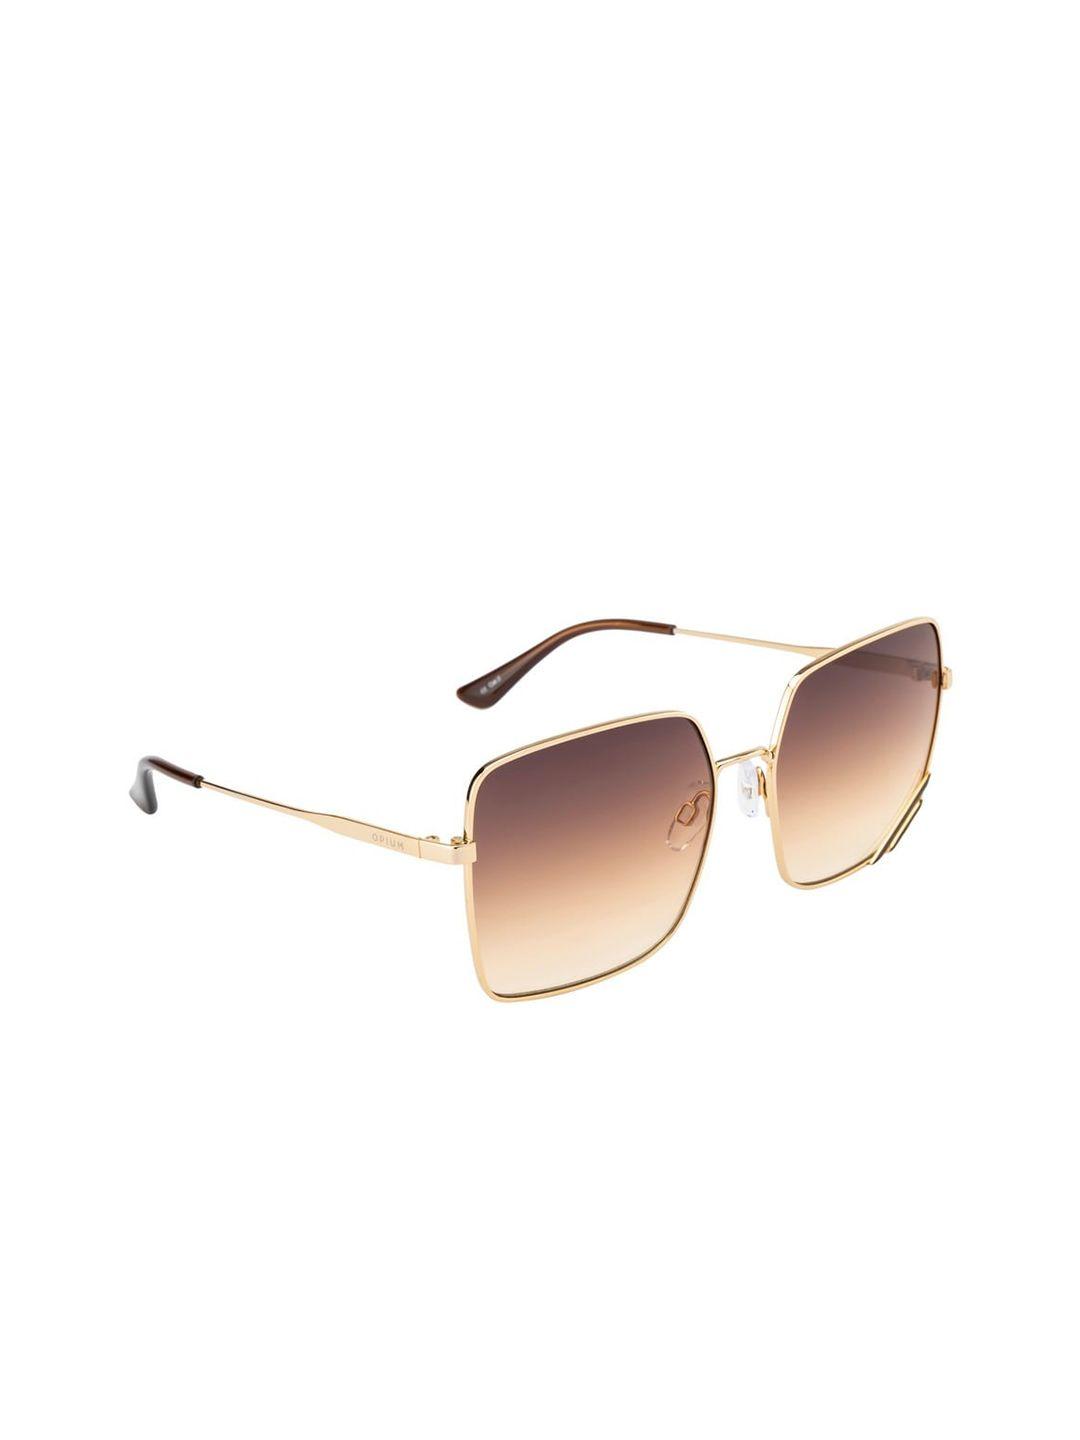 opium square sunglasses with uv protected lens